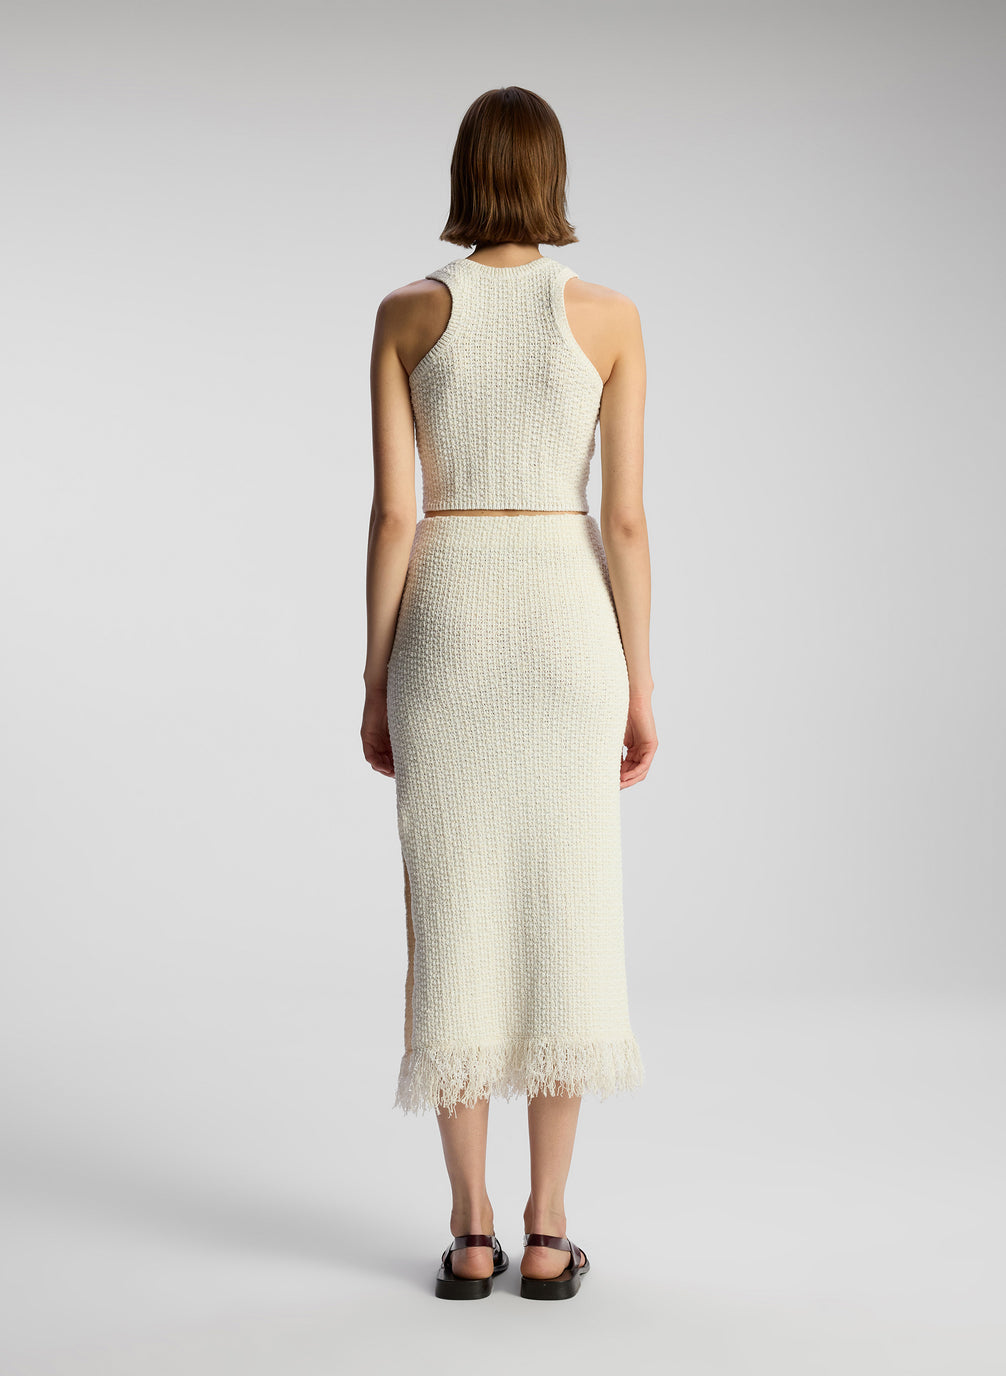 back view of woman wearing white knit sleeveless top and matching skirt